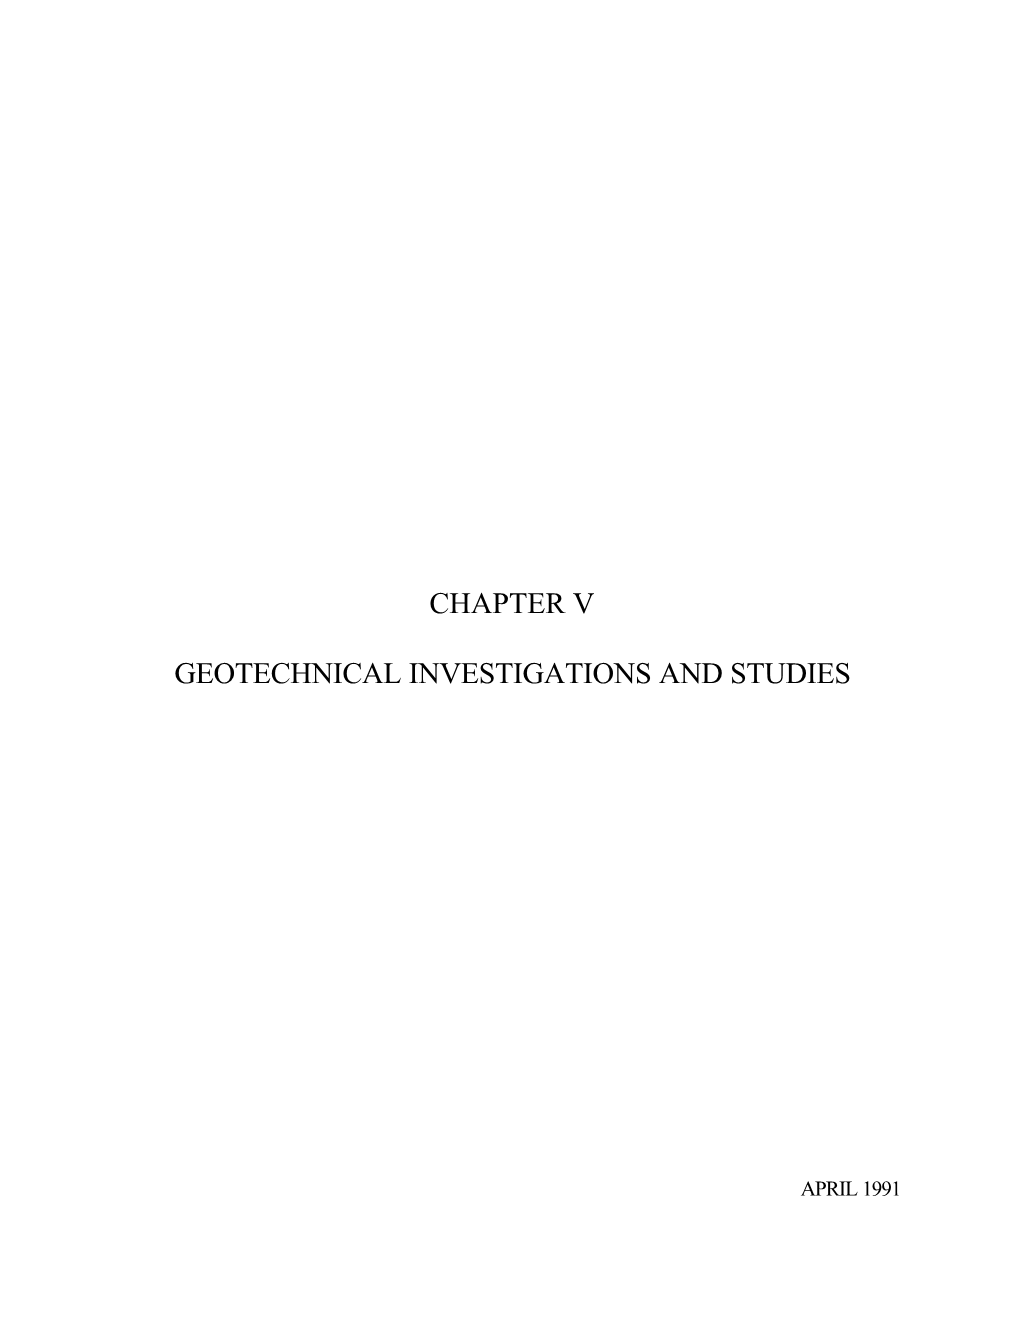 Chapter V Geotechnical Investigations and Studies